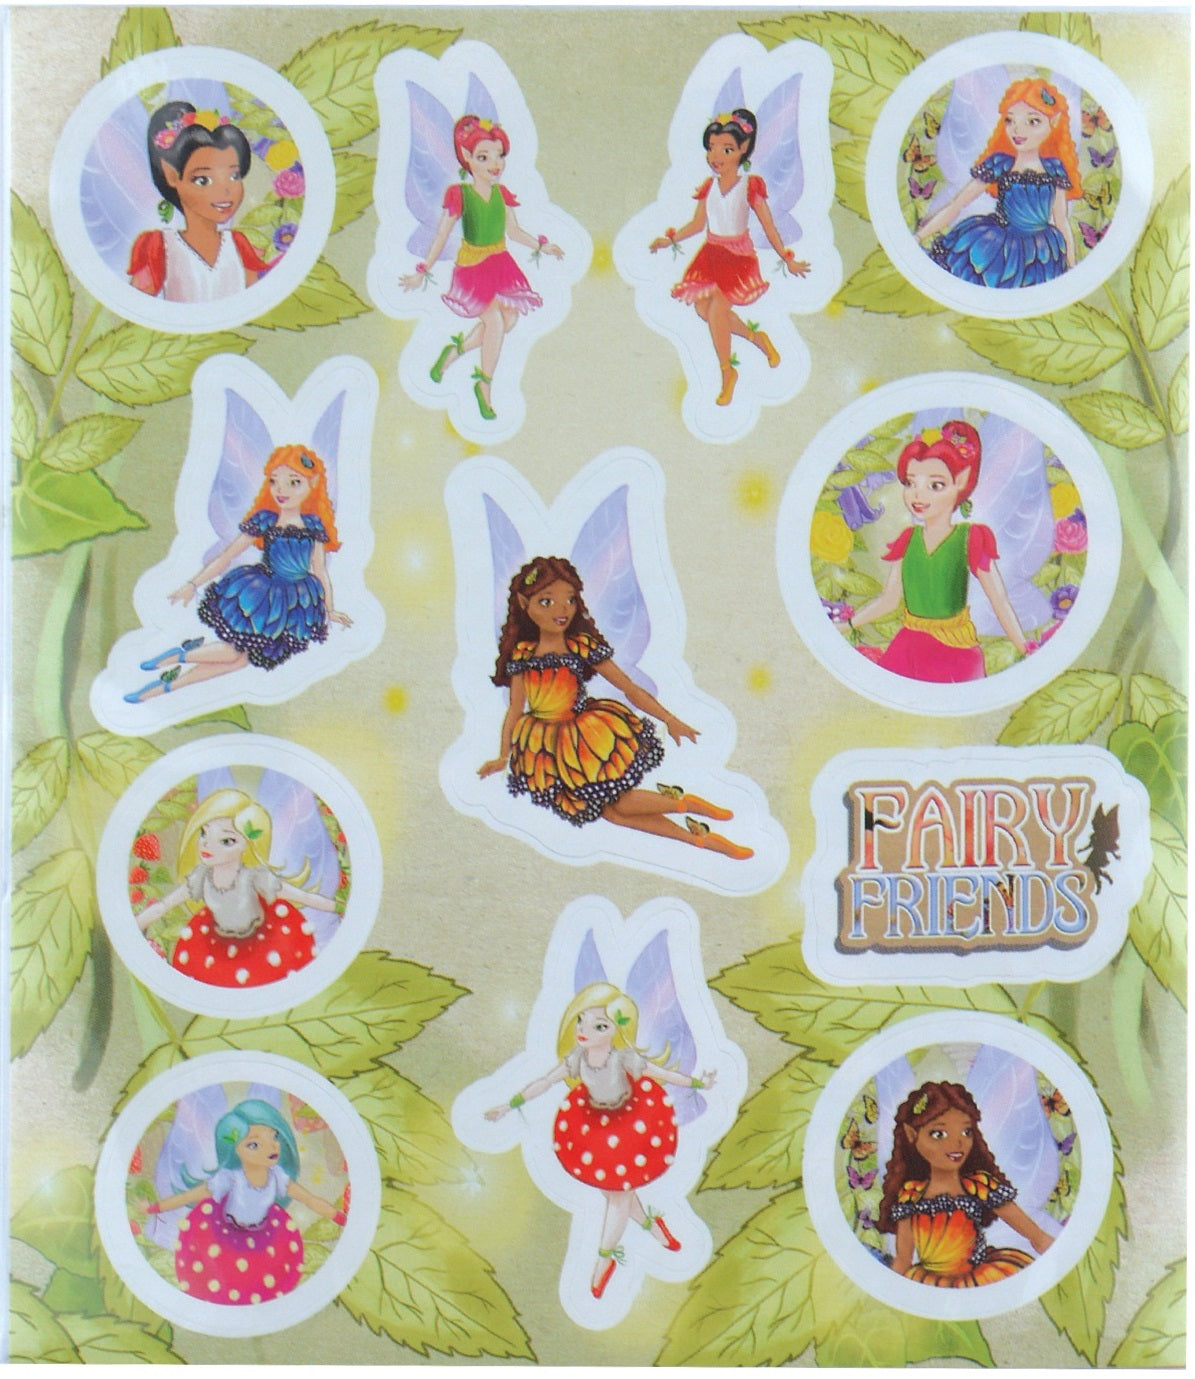 120 Sheets of 12 Fairy Stickers